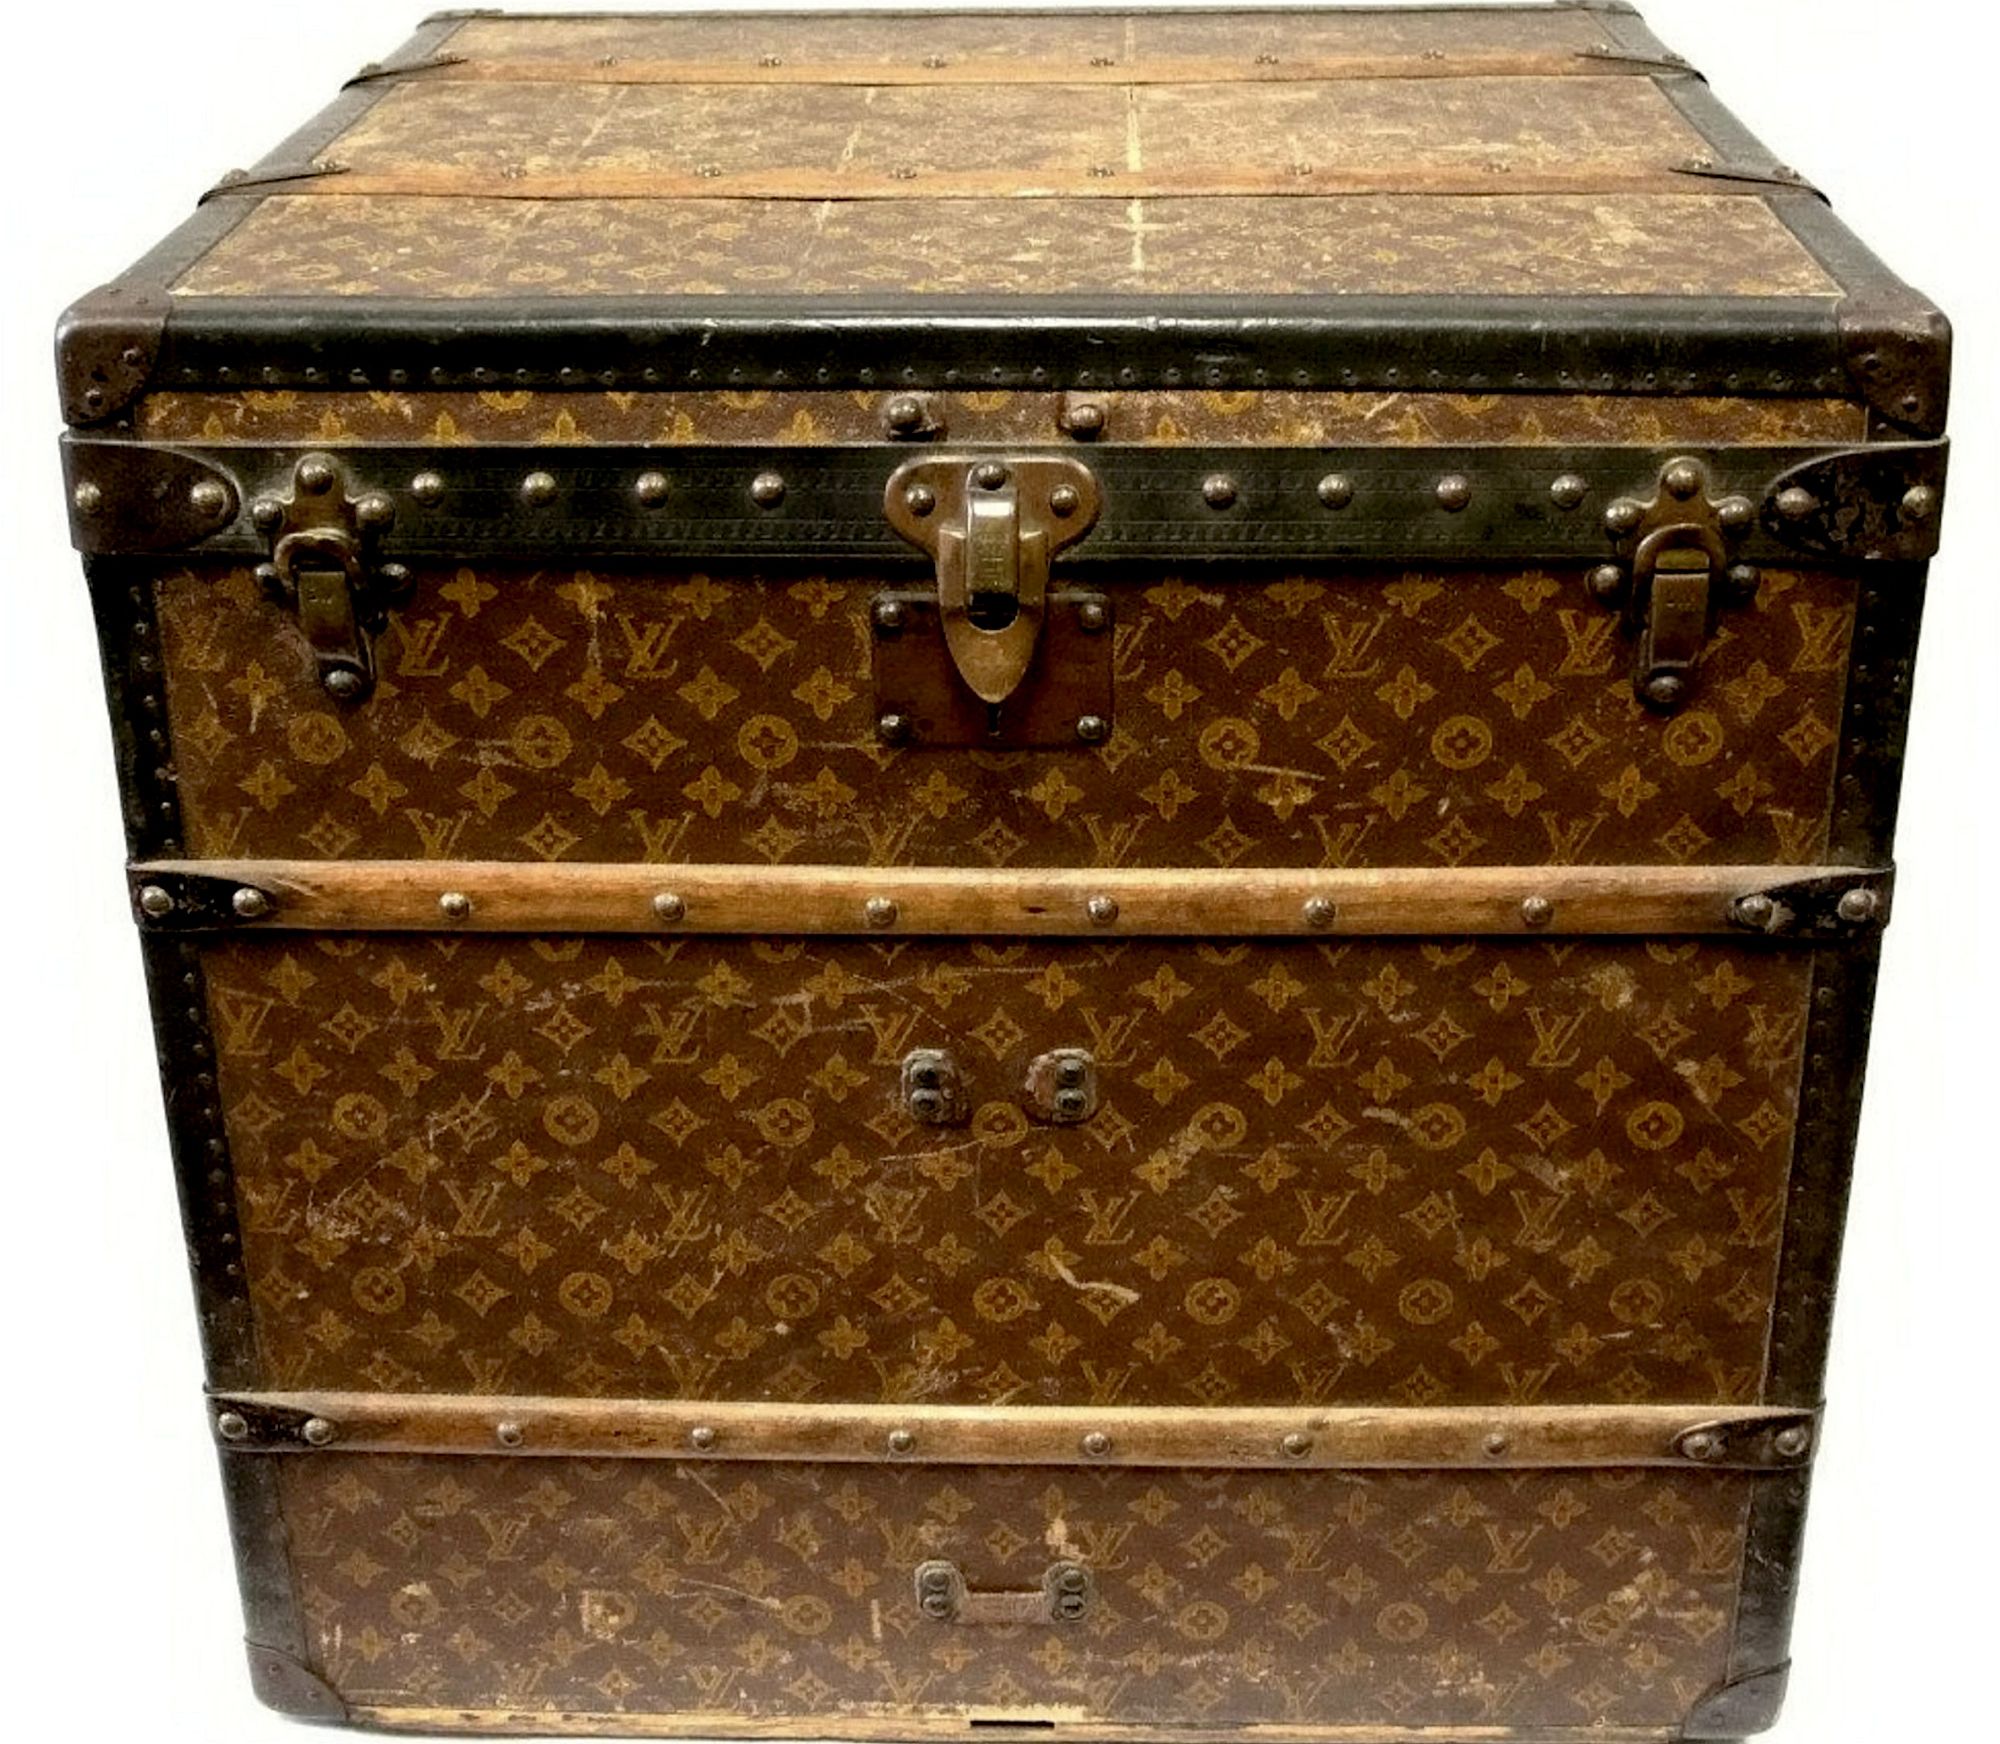 Battered storage box bought for $14 turns out to be rare Louis Vuitton case worth thousands